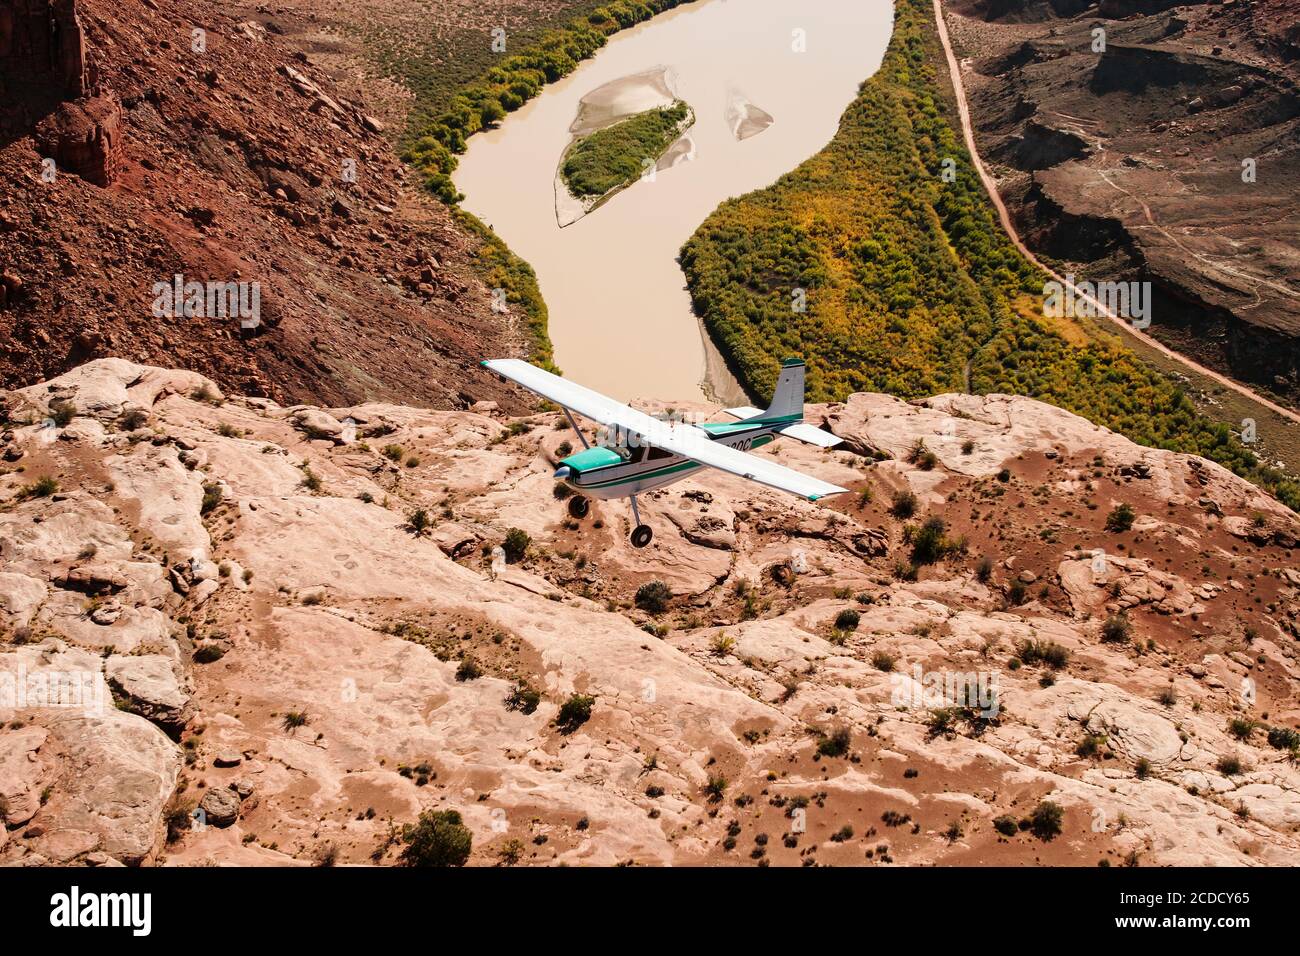 A Cessna 180 Skywagon from the Utah Backcountry Pilots Association flies over the Green River in Labyrinth Canyon near Moab, Utah. Stock Photo